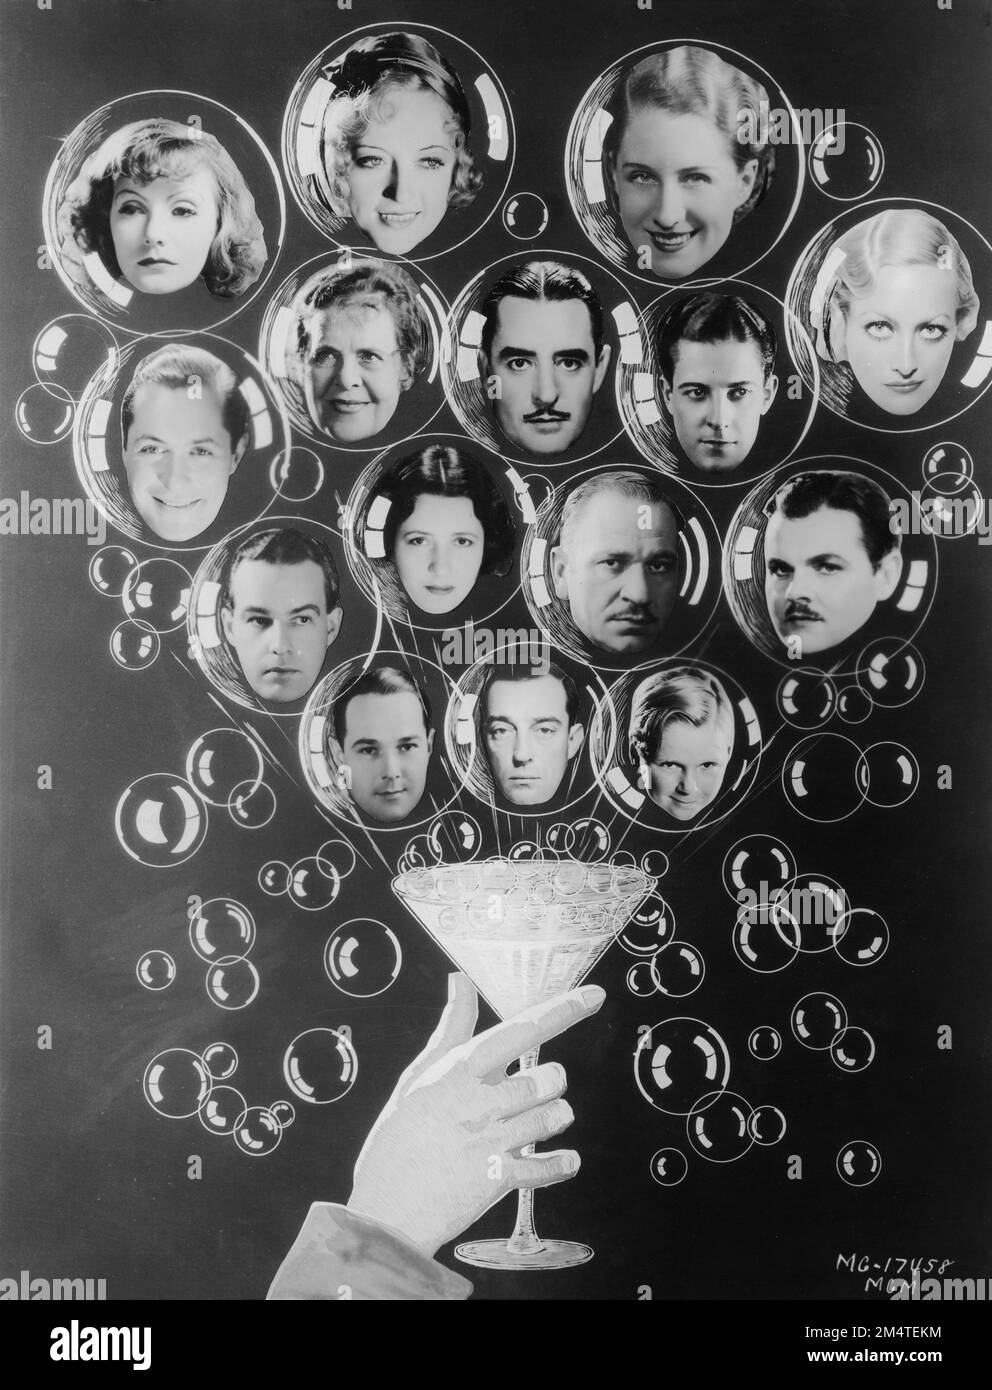 Collage of MGM Movie Stars from 1931 featuring from top left : GRETA GARBO, MARION DAVIES NORMA SHEARER, ROBERT MONTGOMERY, MARIE DRESSLER, JOHN GILBERT, RAMON NOVARRO, ALFRED LUNT, LYNN FONTANNE, WALLACE BEERY, LAWRENCE TIBBETT, WILLIAM HAINES, BUSTER KEATON and JACKIE COOPER publicity for Metro Goldwyn Mayer Stock Photo